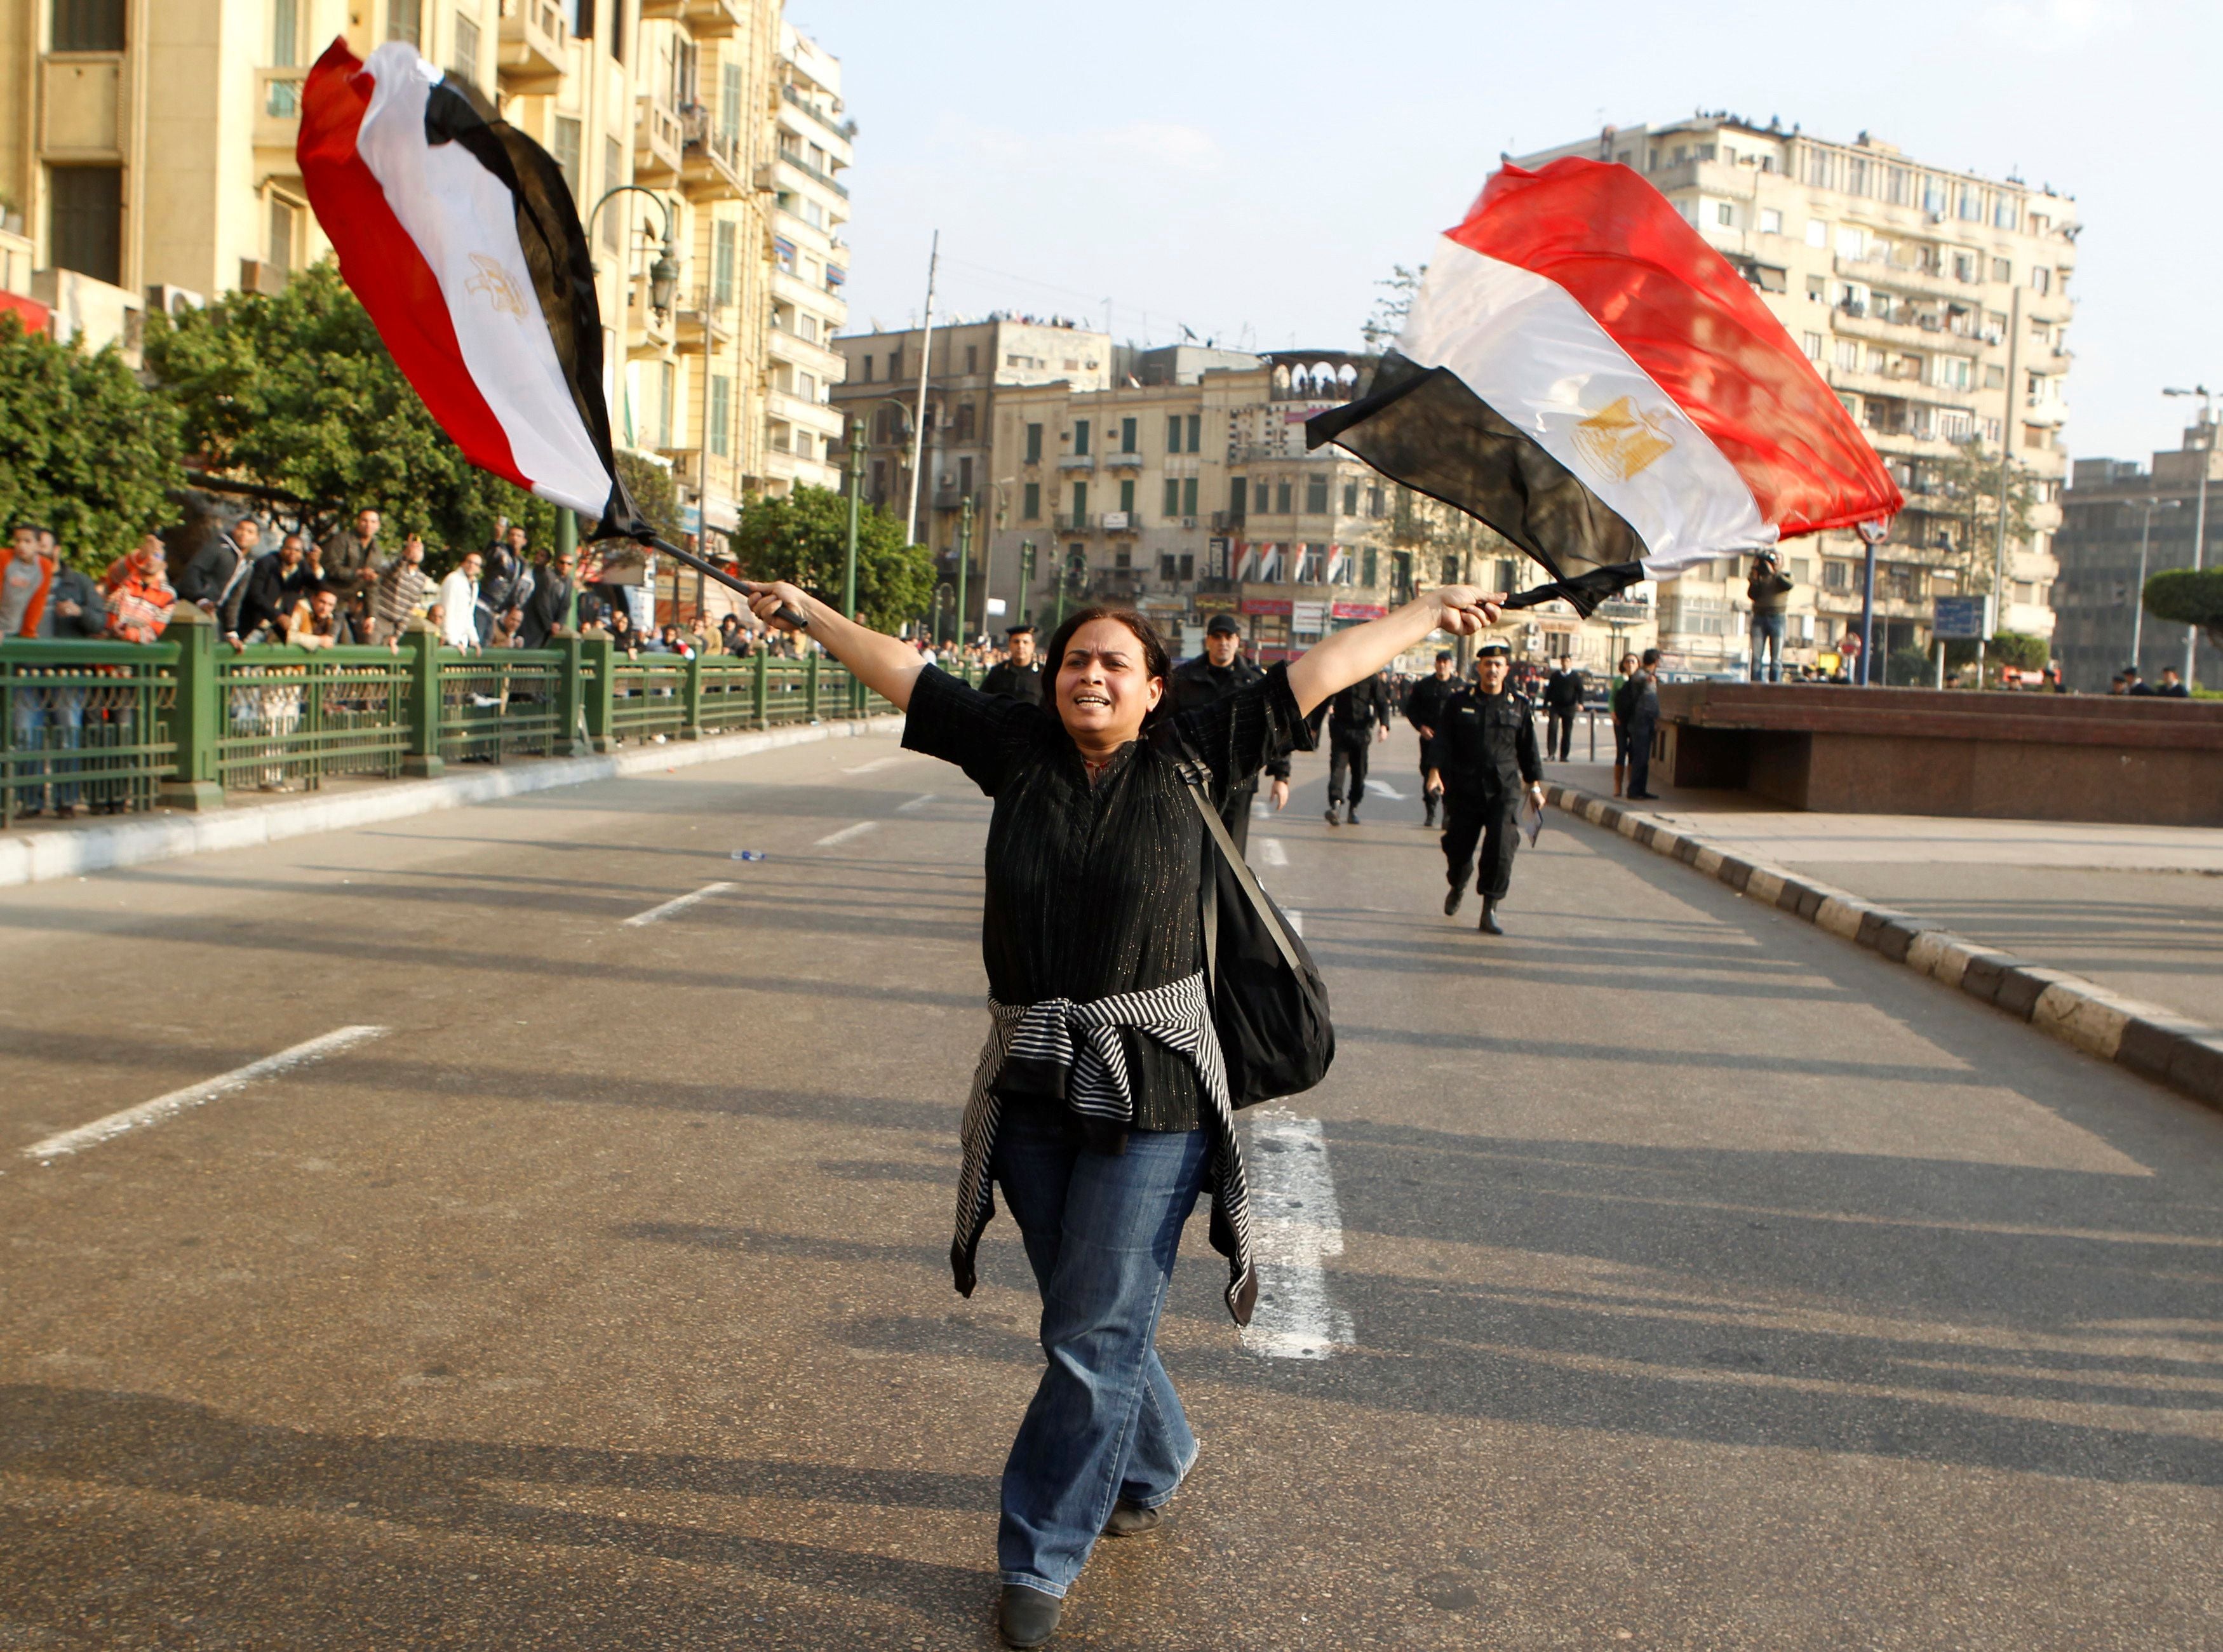 An anti-government protester waves Egyptian flags during clashes with police in downtown Cairo on 25 January 2011.